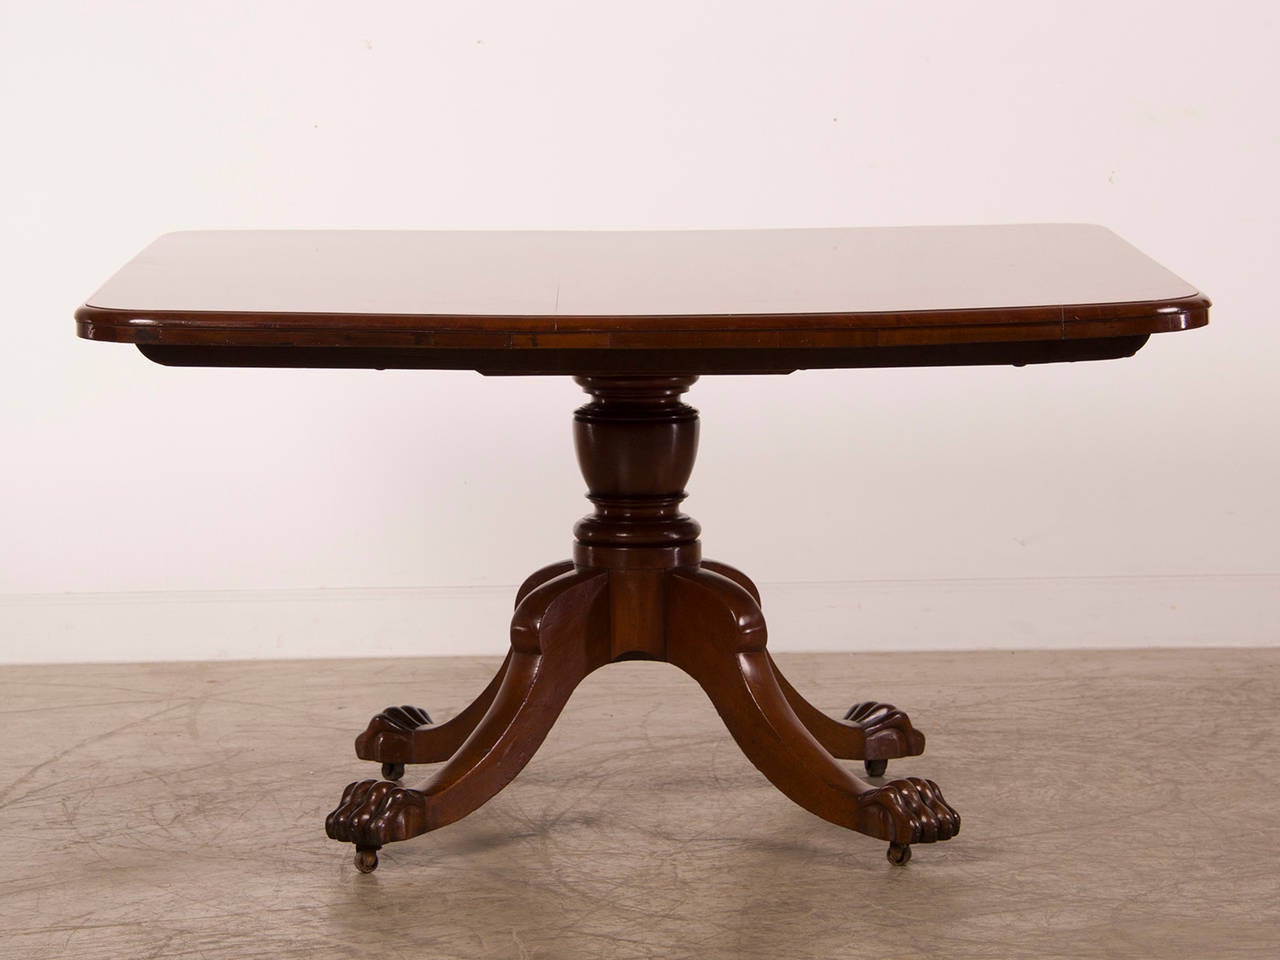 Receive our new selections direct from 1stdibs by email each week. Please click Follow Dealer below and see them first!

An antique English William IV period mahogany breakfast table circa 1835 having a square top supported by a central pedestal